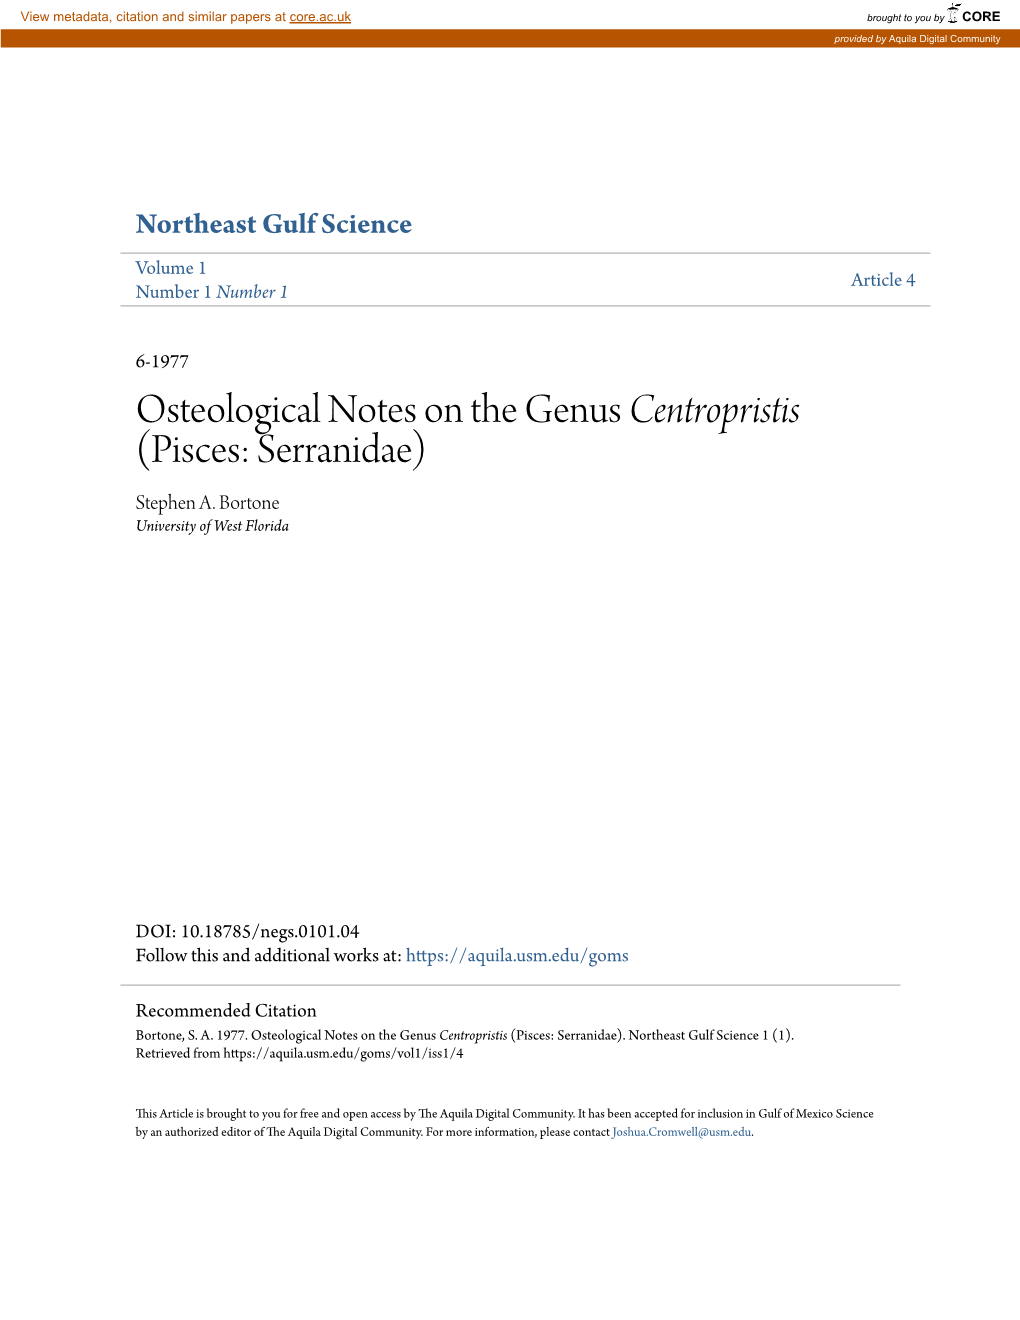 Osteological Notes on the Genus Centropristis (Pisces: Serranidae) Stephen A